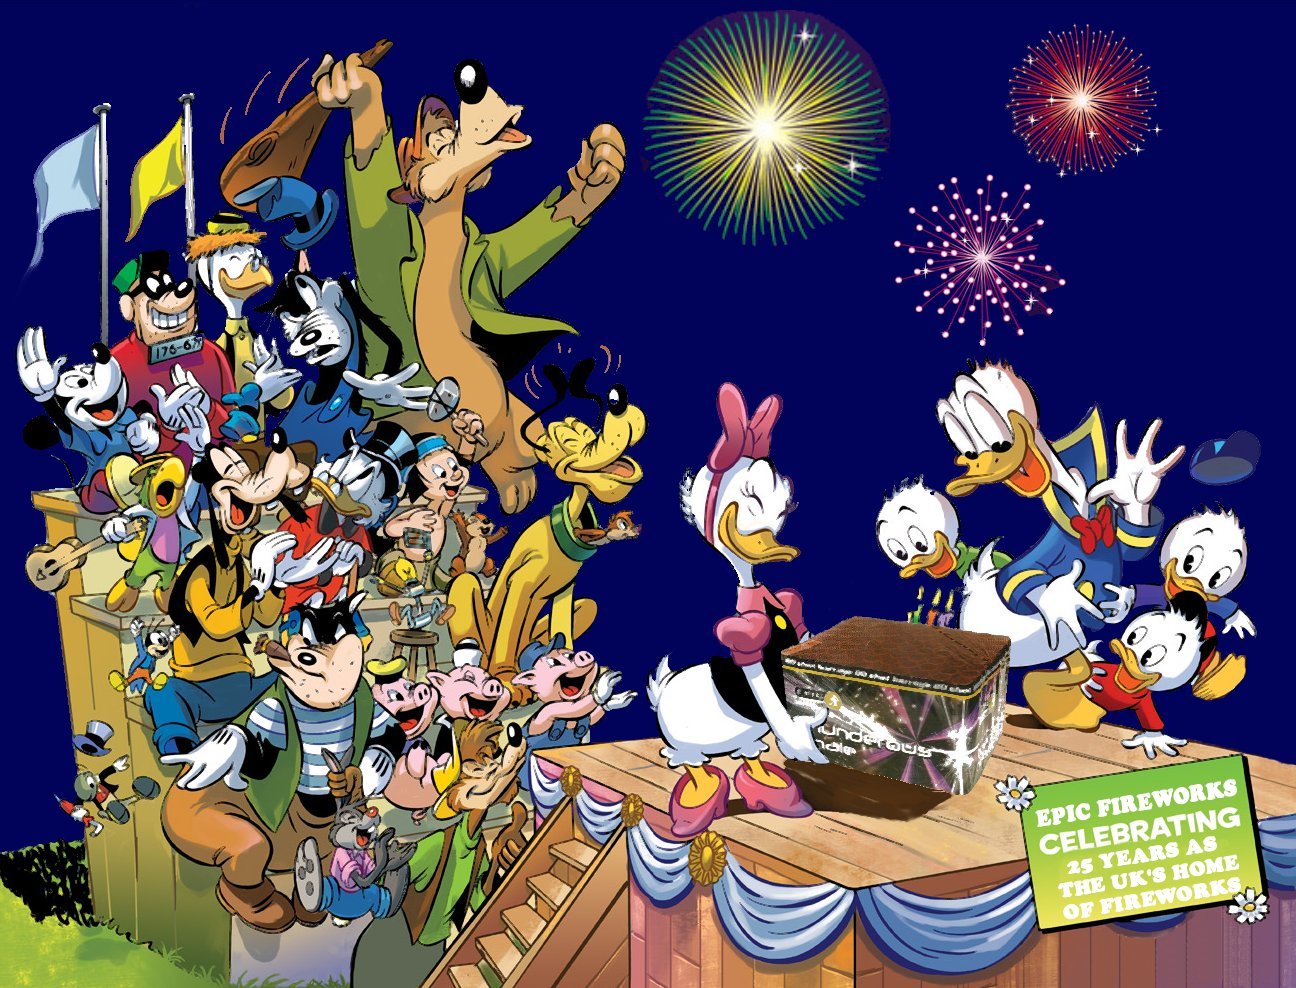 THE HISTORY OF DISNEY FIREWORKS, AND A NEW SHOW!